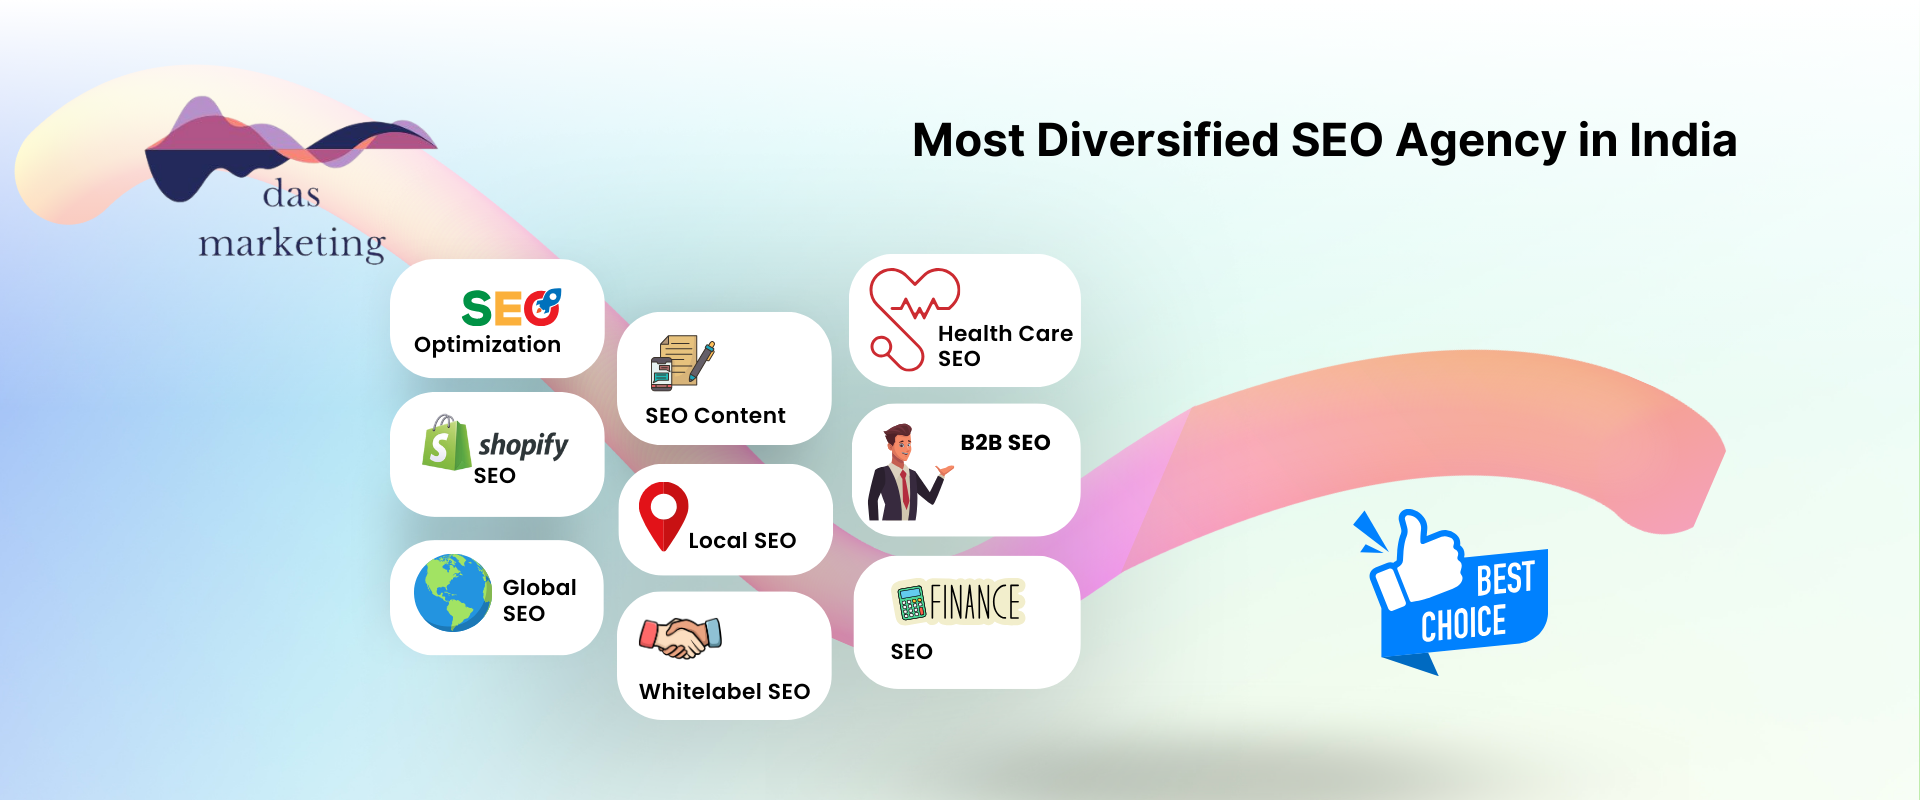 The diversified seo agency in India